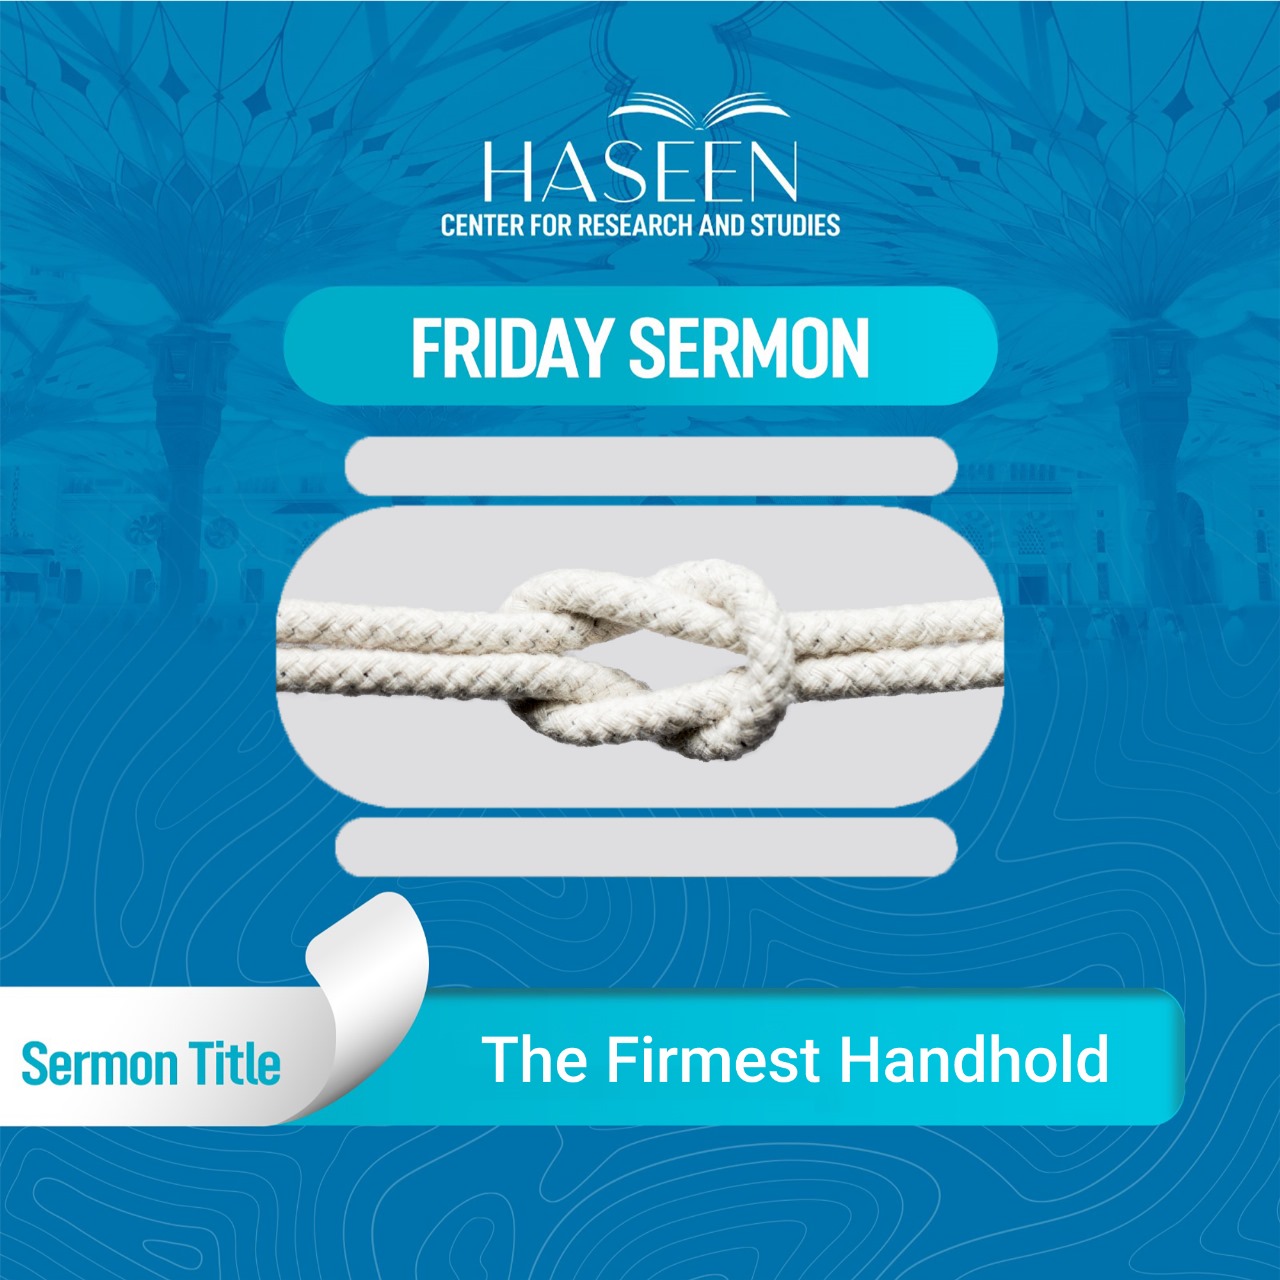 Title of the Sermon: The Firmest Handhold